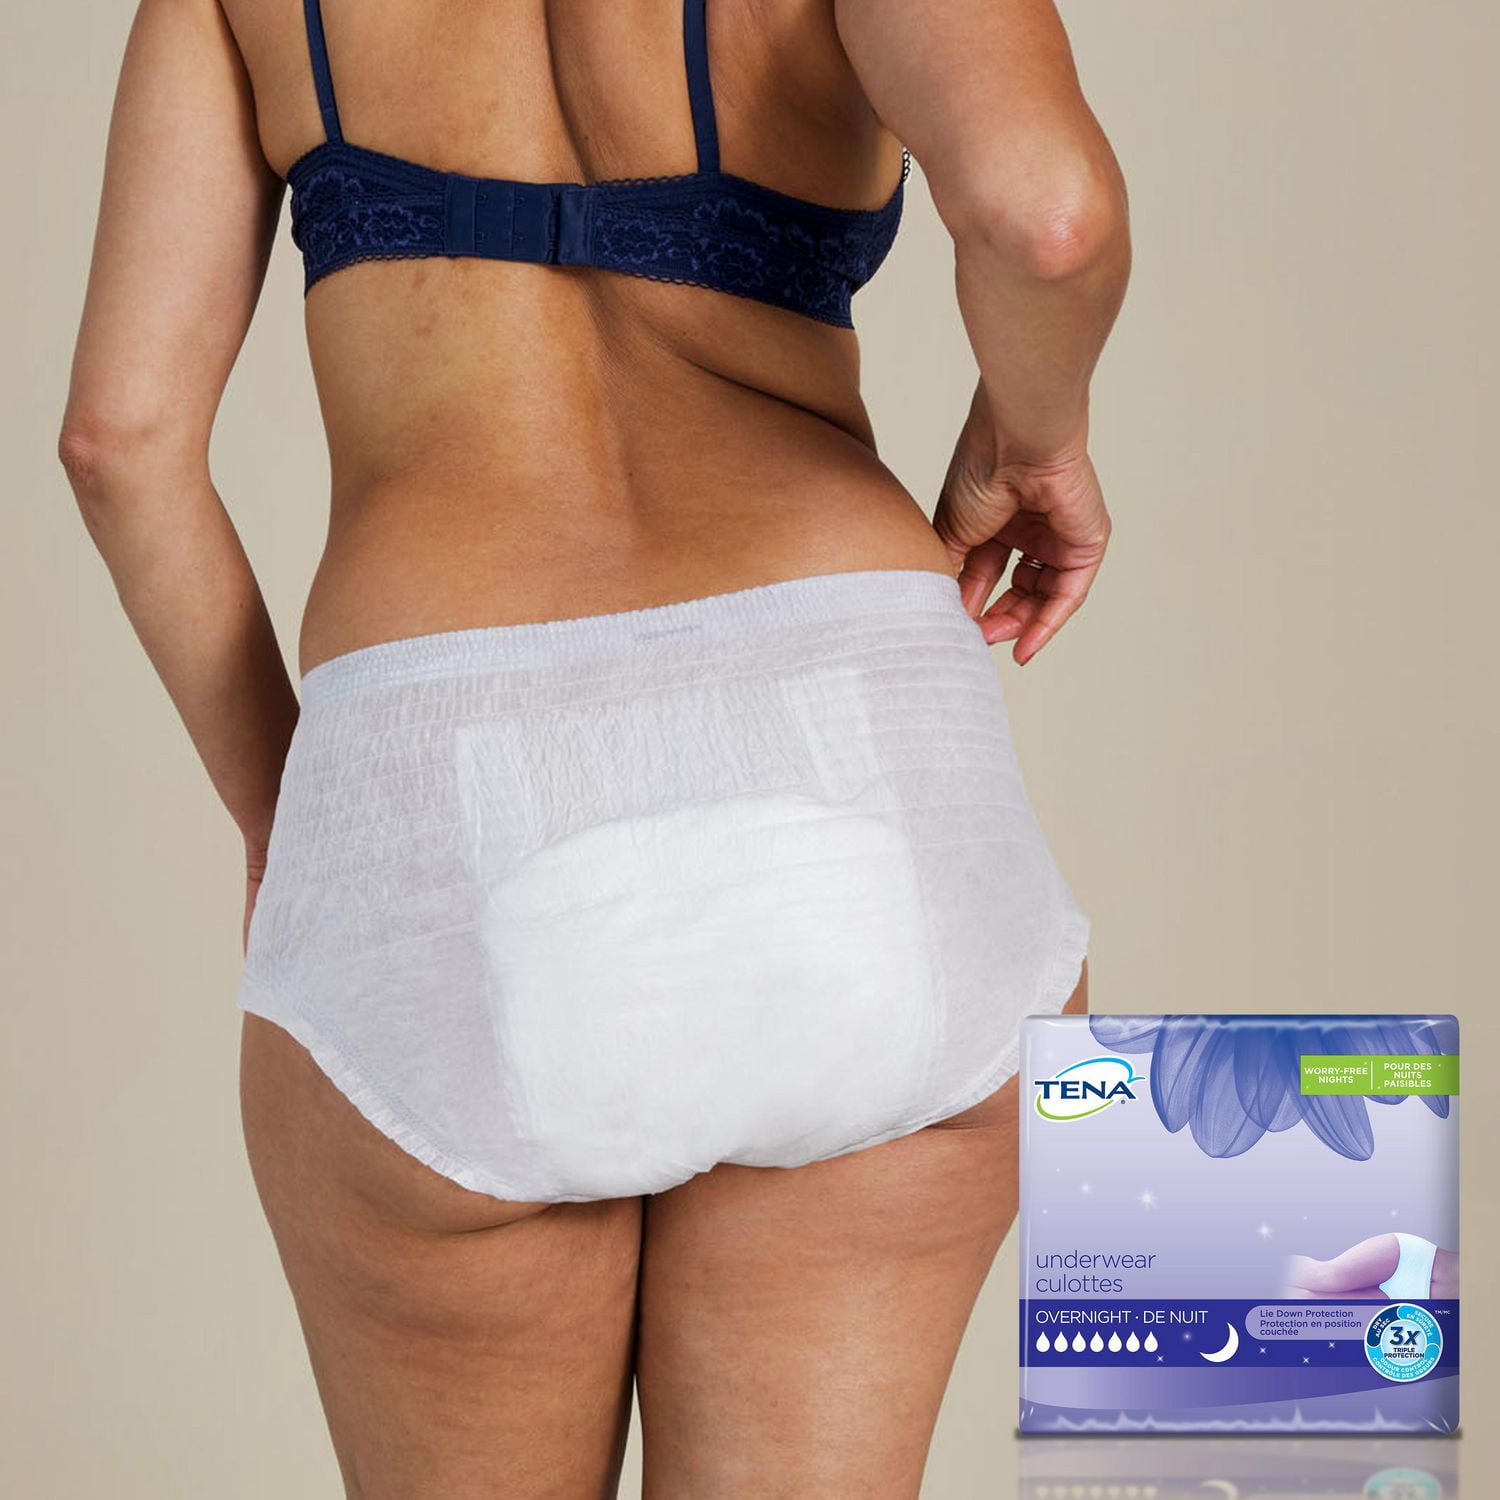 Adult Diapers - Tena Adult Pullups, Extra Absorbency, Medium, 64 per case,  Shipping Included